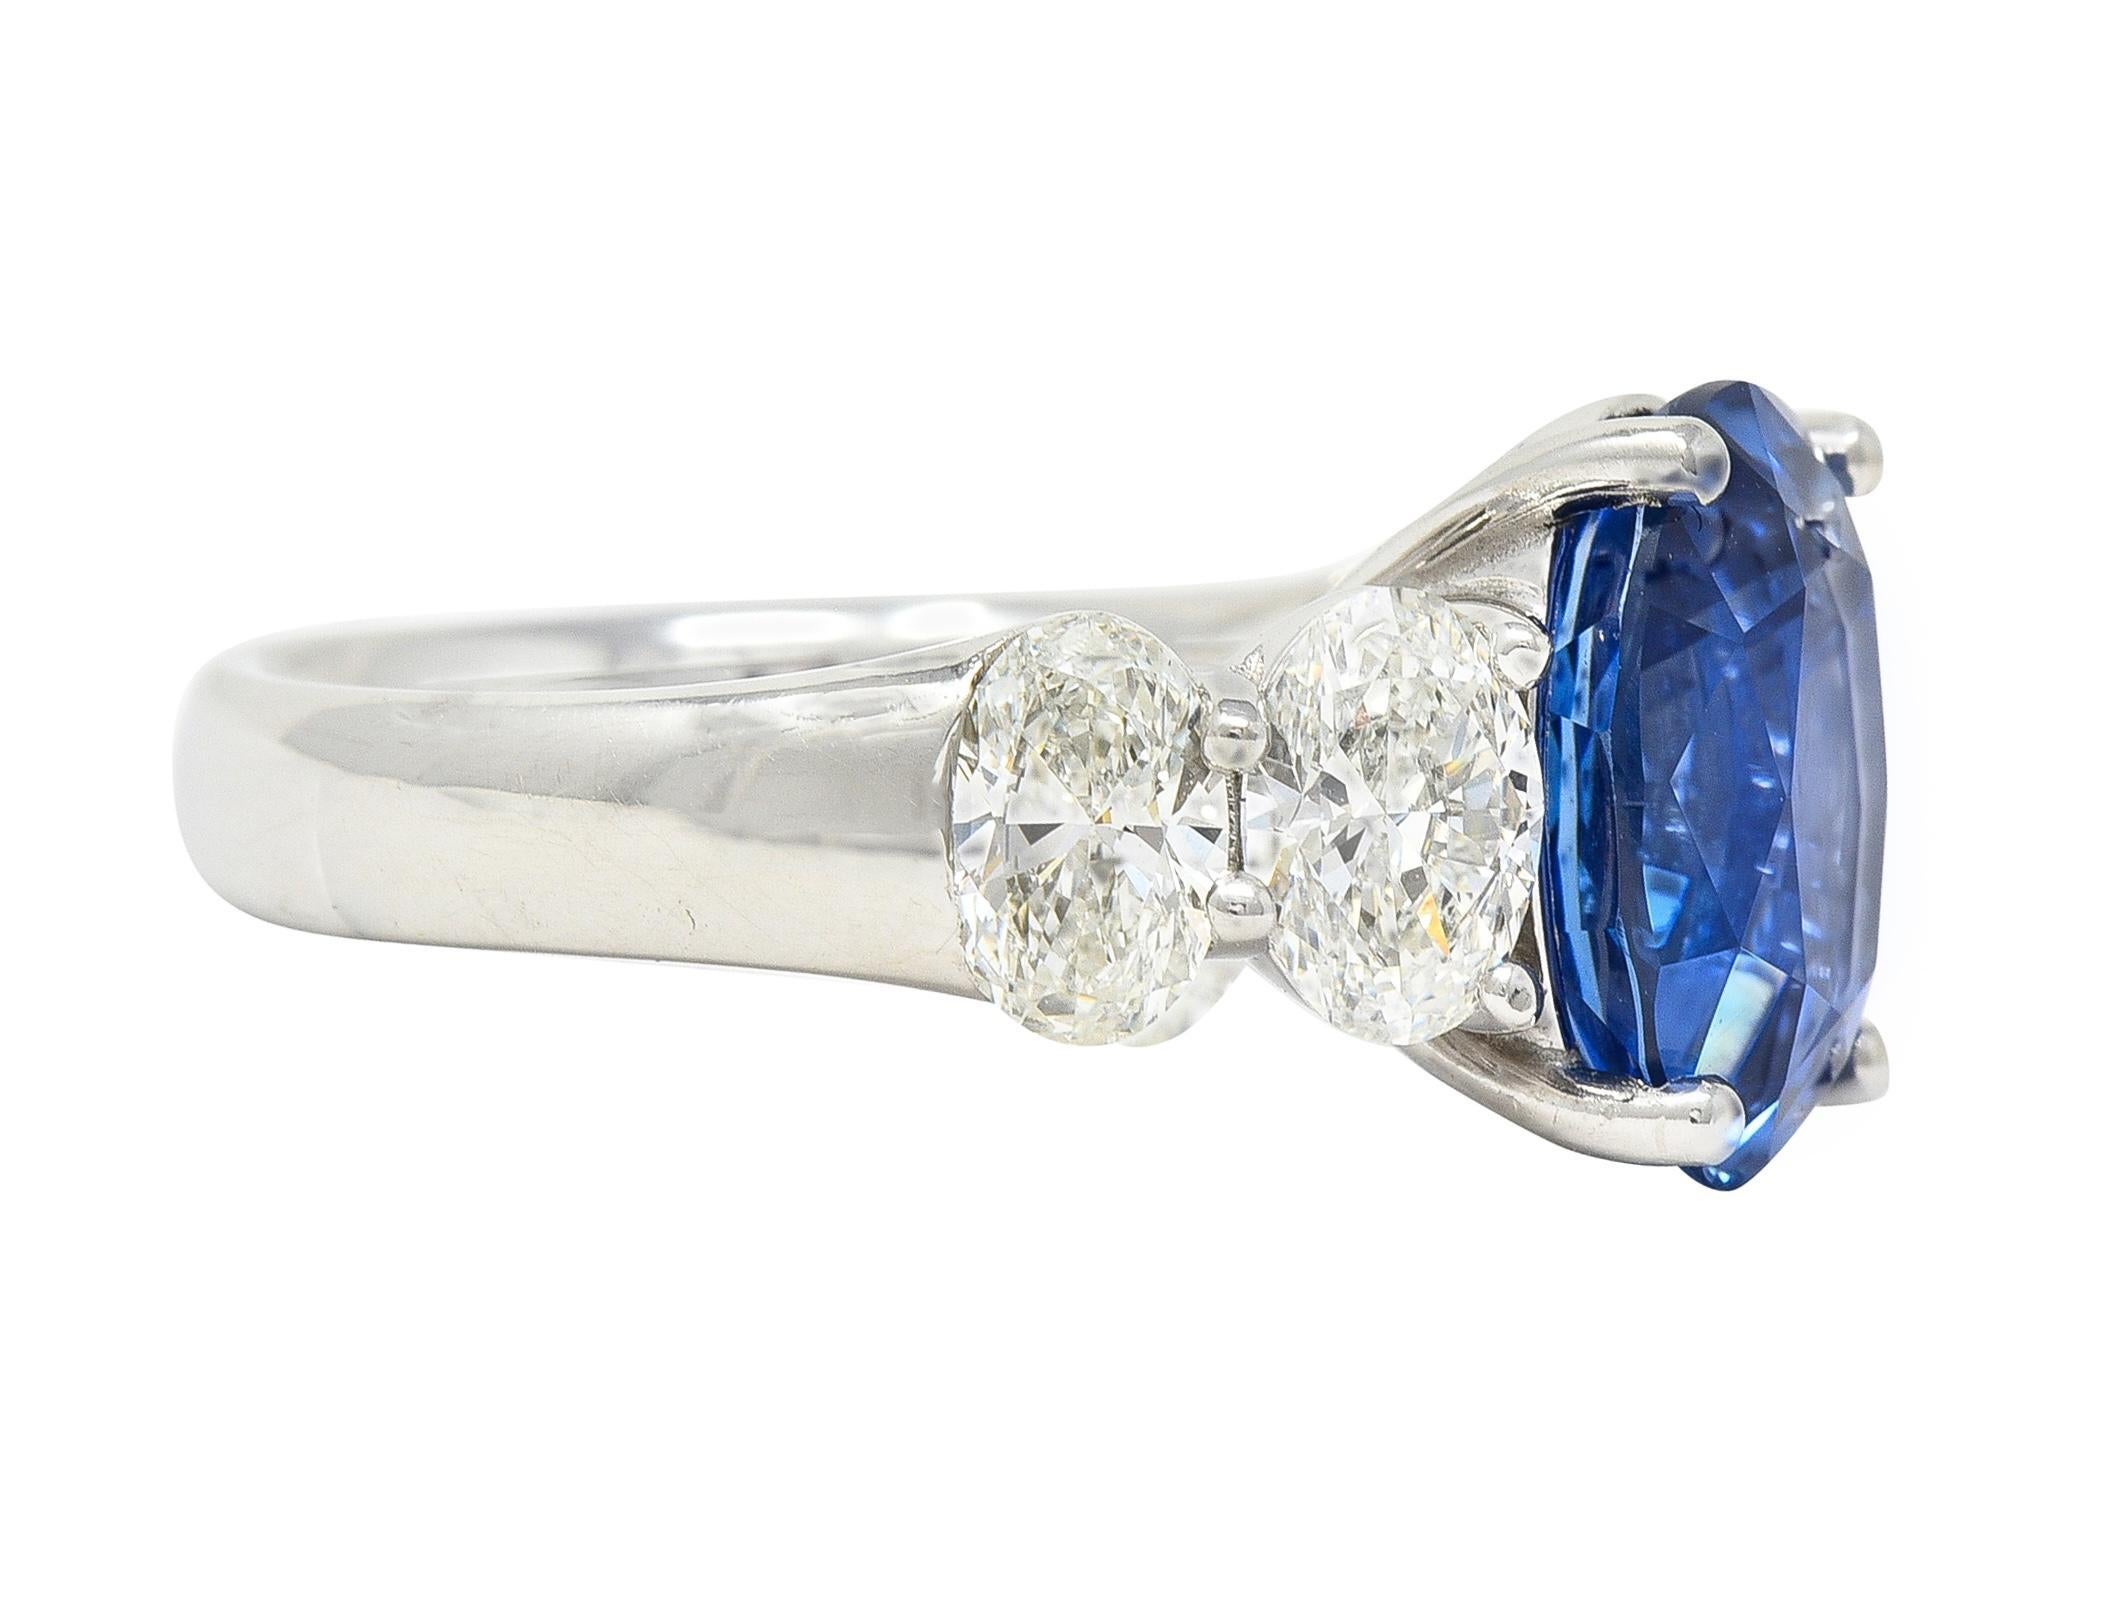 Centering an oval cut sapphire weighing 5.31 carats - transparent vibrant blue 
Natural Sri Lankan in origin - prong set in basket and flanked by diamonds 
Oval cut and weighing approximately 1.84 carats total 
L color with VS2 clarity - prong set